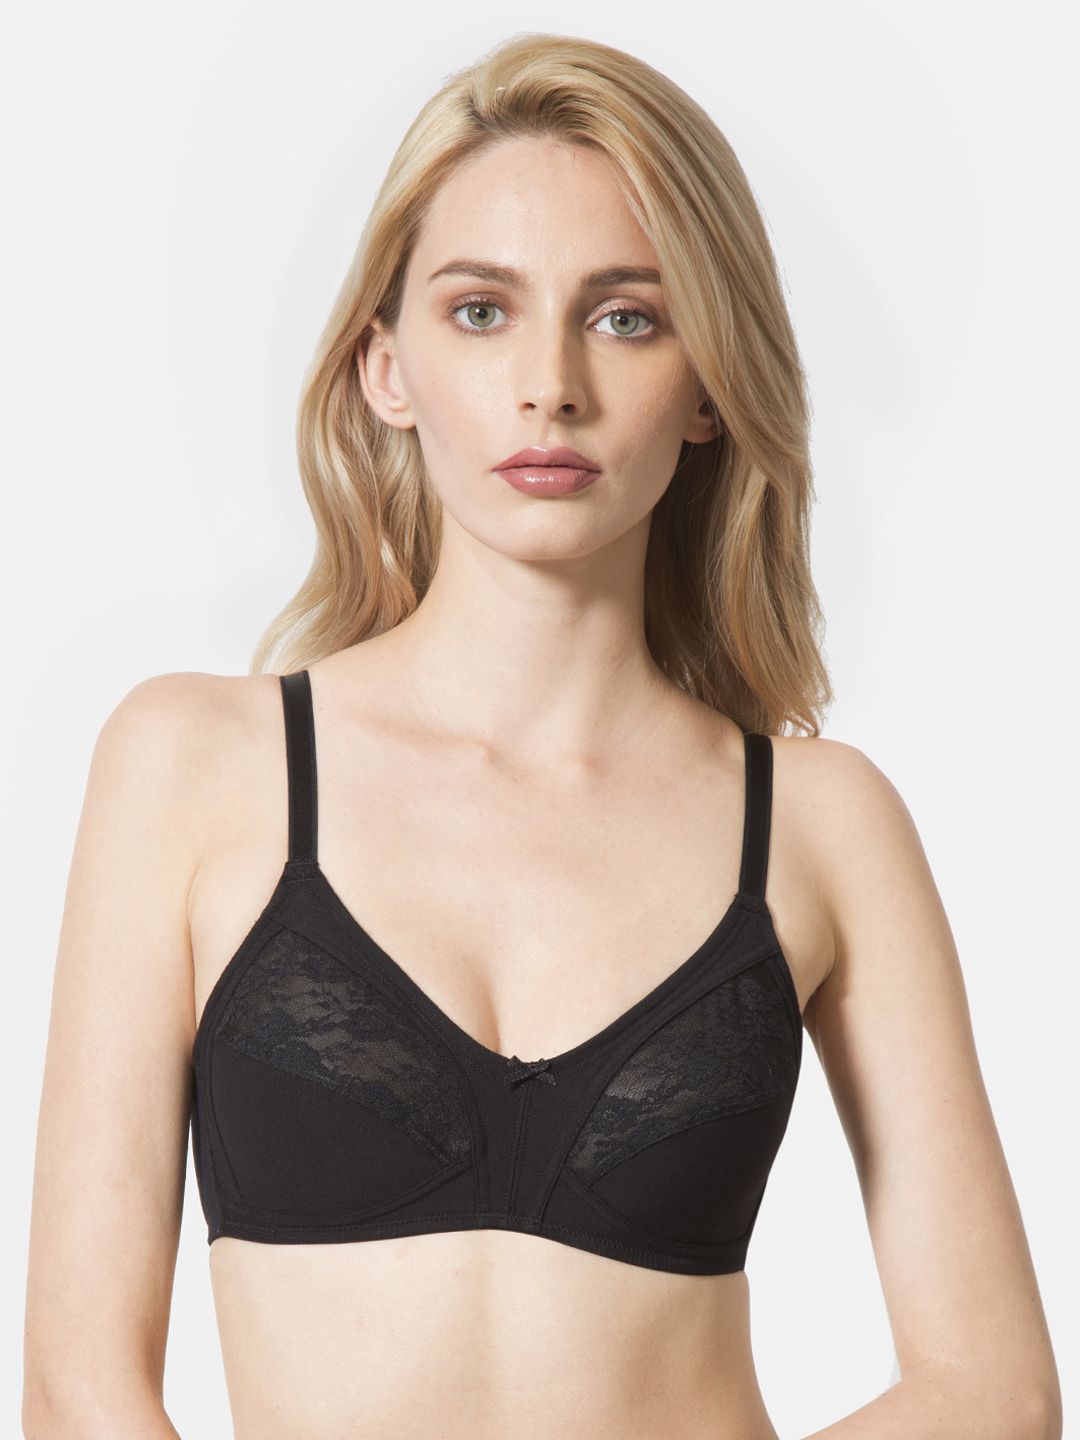 Van Heusen Black Lace Non-Wired Non Padded Magic Lift Full Support Everyday Bra ILIBR1ACSSXD11008 Price in India